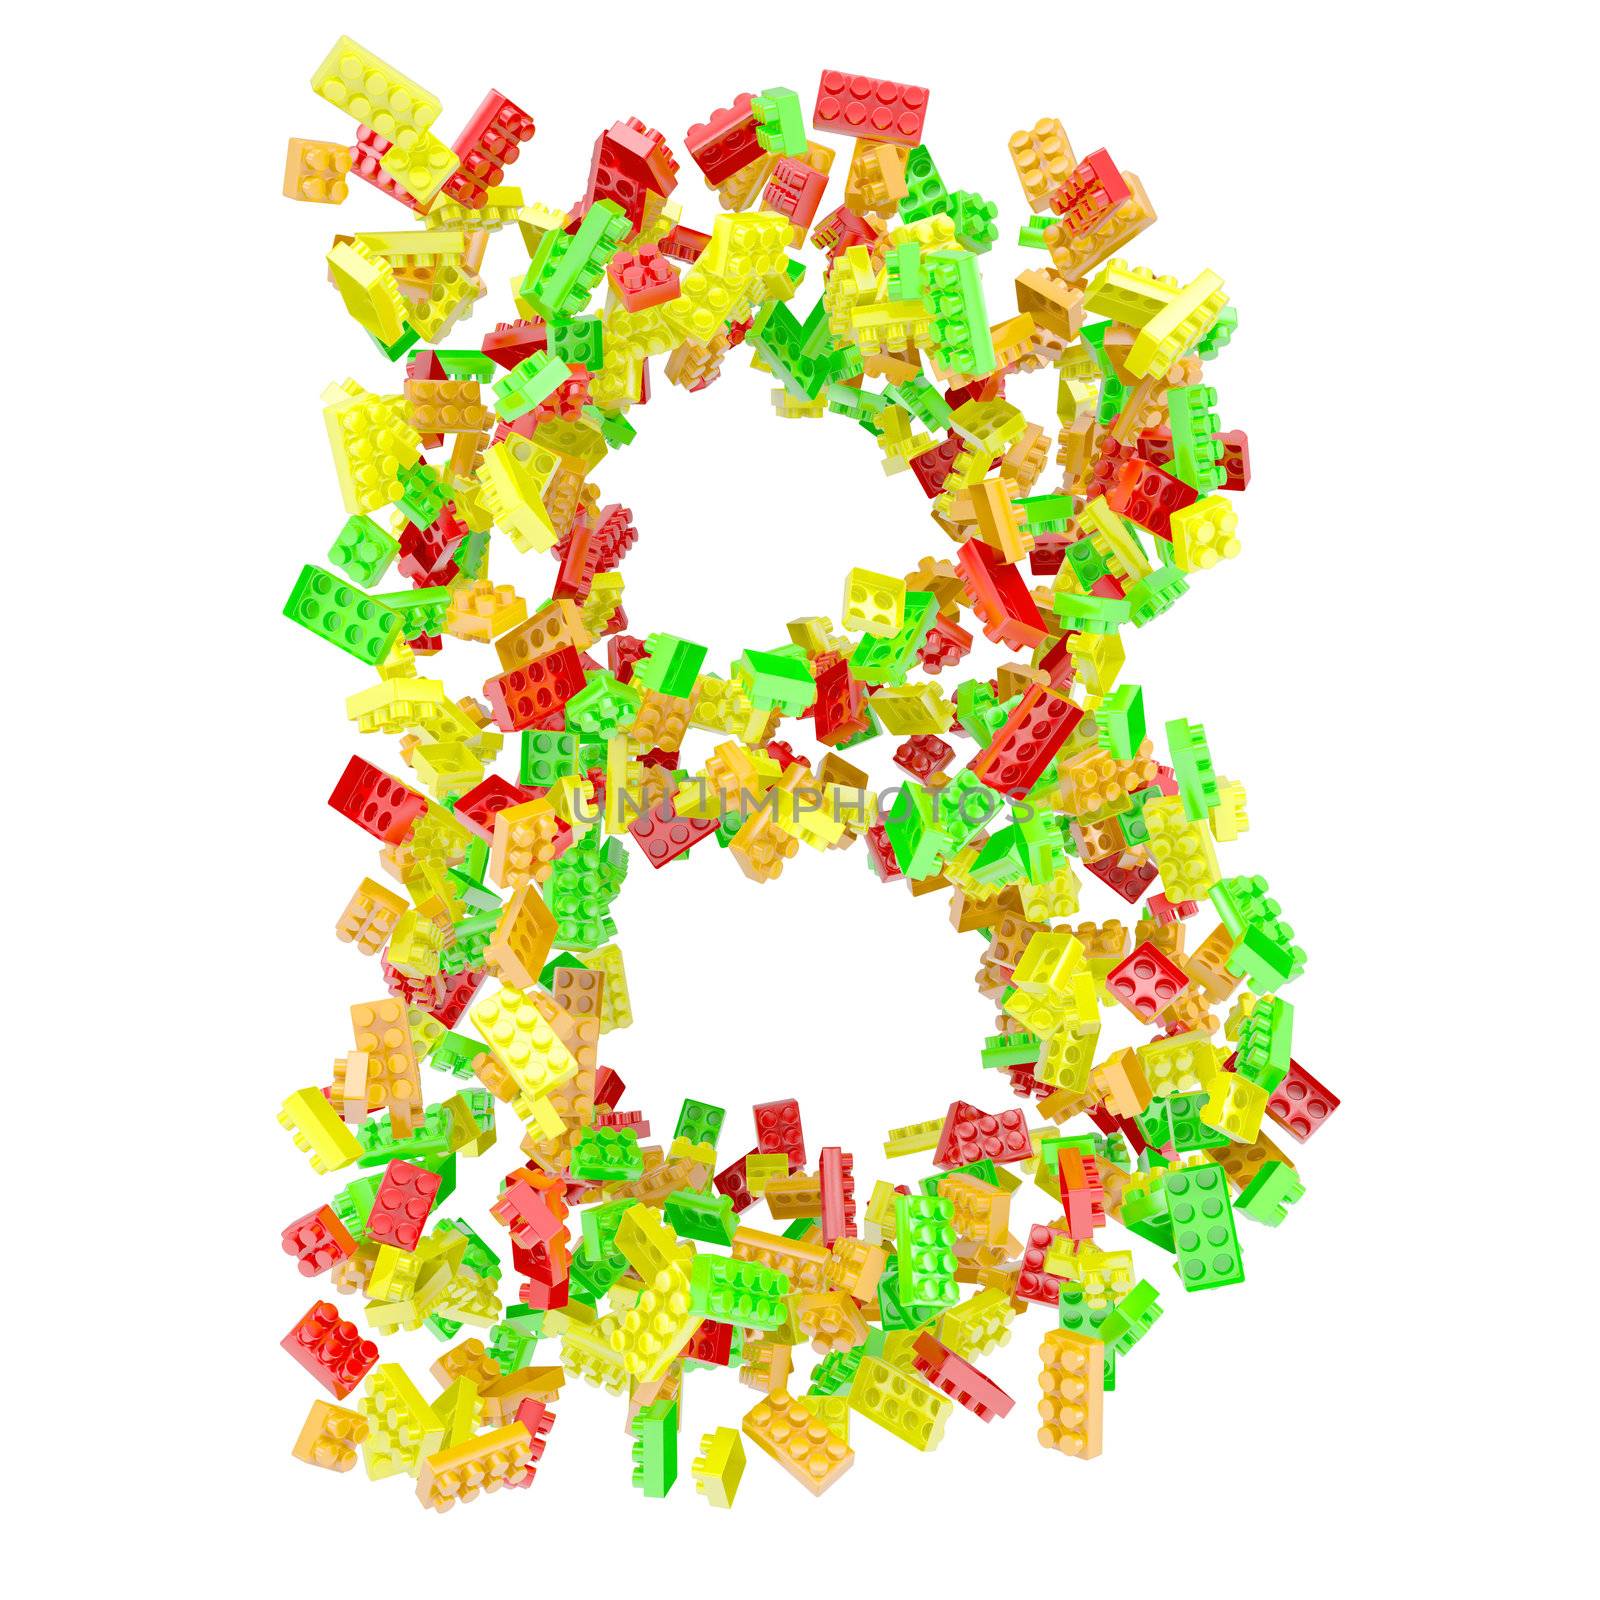 The letter B is made up of children's blocks by cherezoff